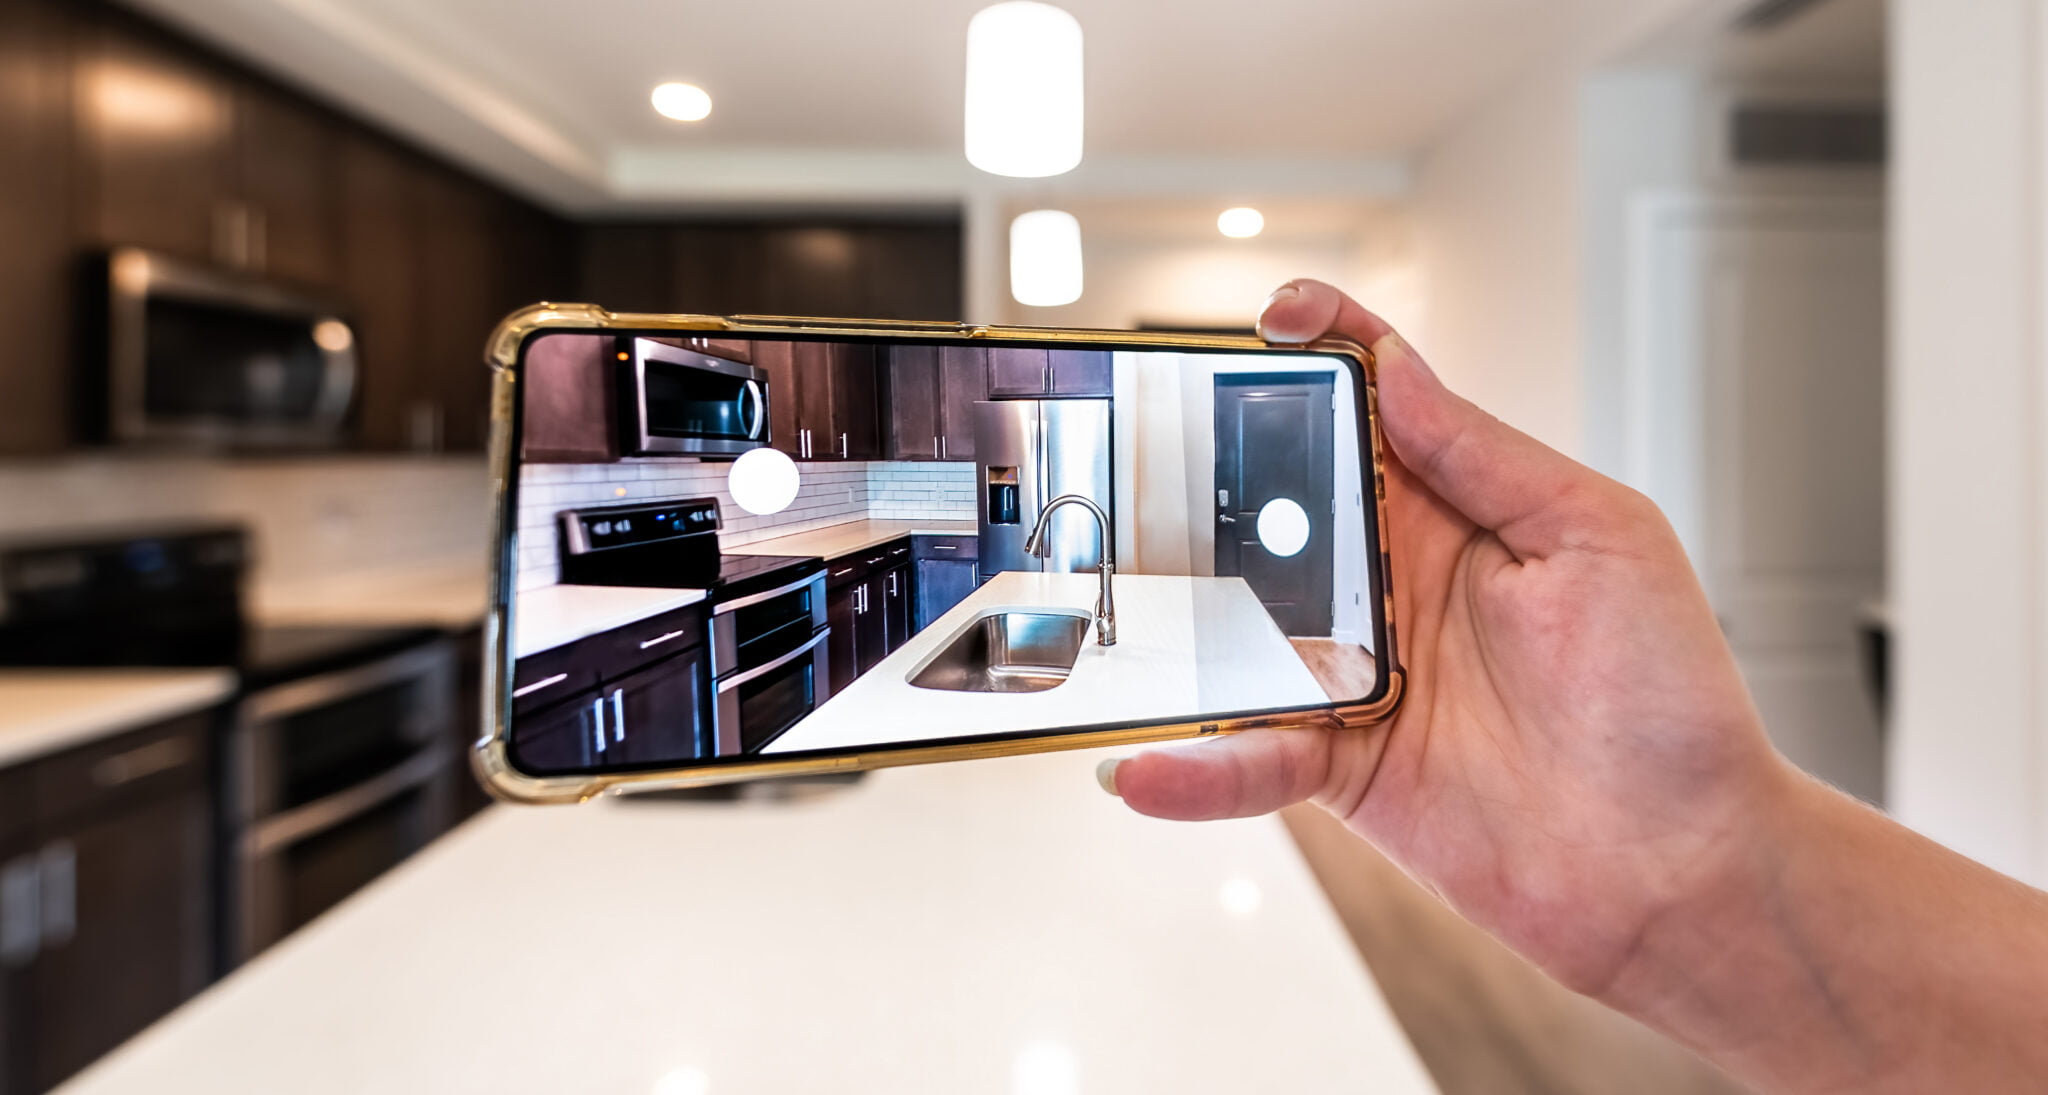 Hand photographing house apartment kitchen island room for sale or rent with phone smartphone closeup point of view in modern luxury condo home with blurry bokeh background